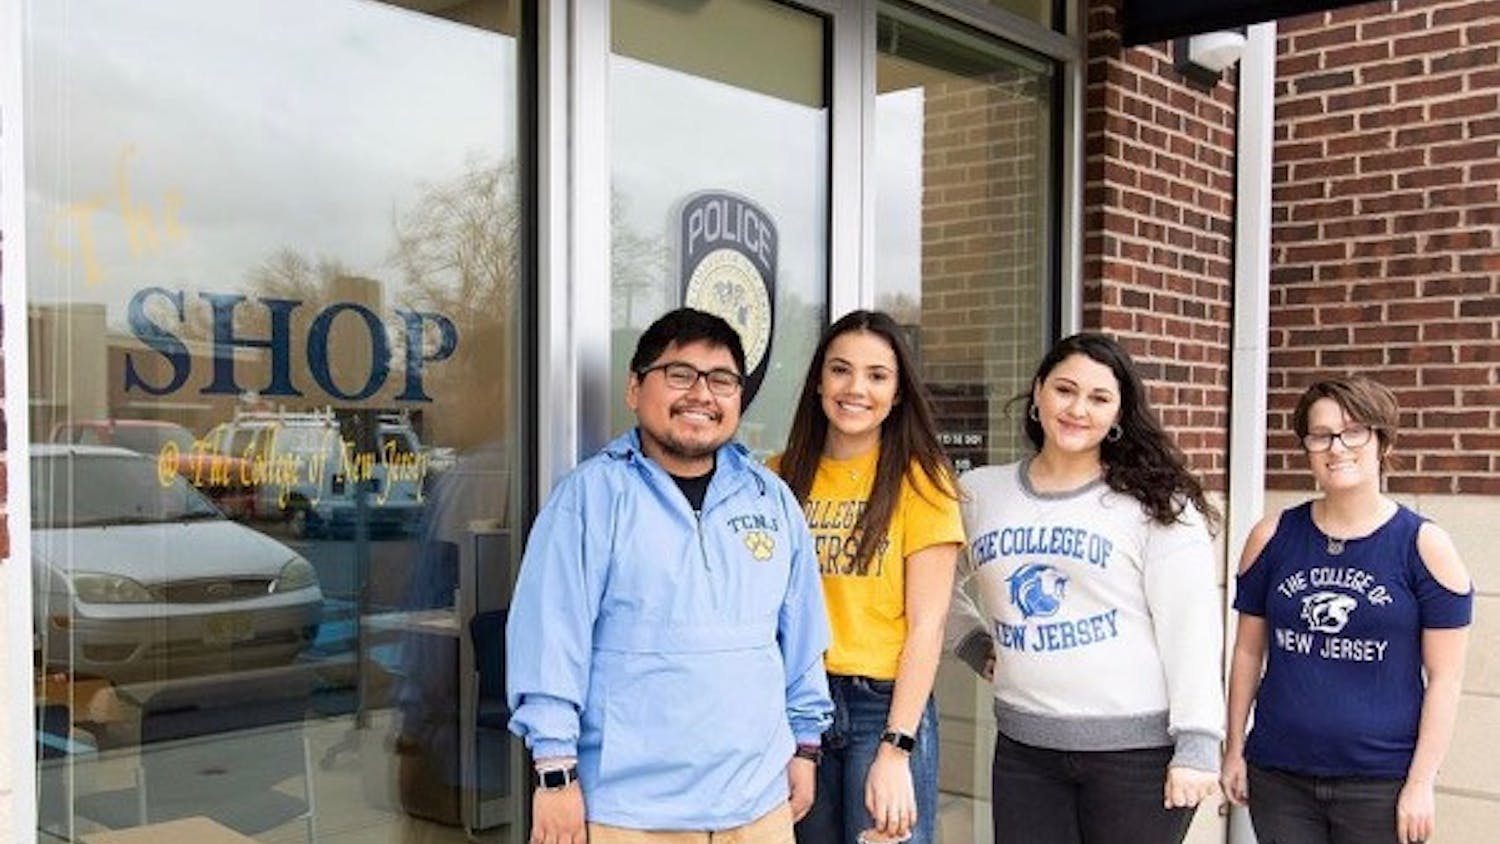 The Shop at TCNJ opened in February 2019 to help low-income students receive food free of charge. (Photo courtesy of @theshop_tcnj/Instagram)